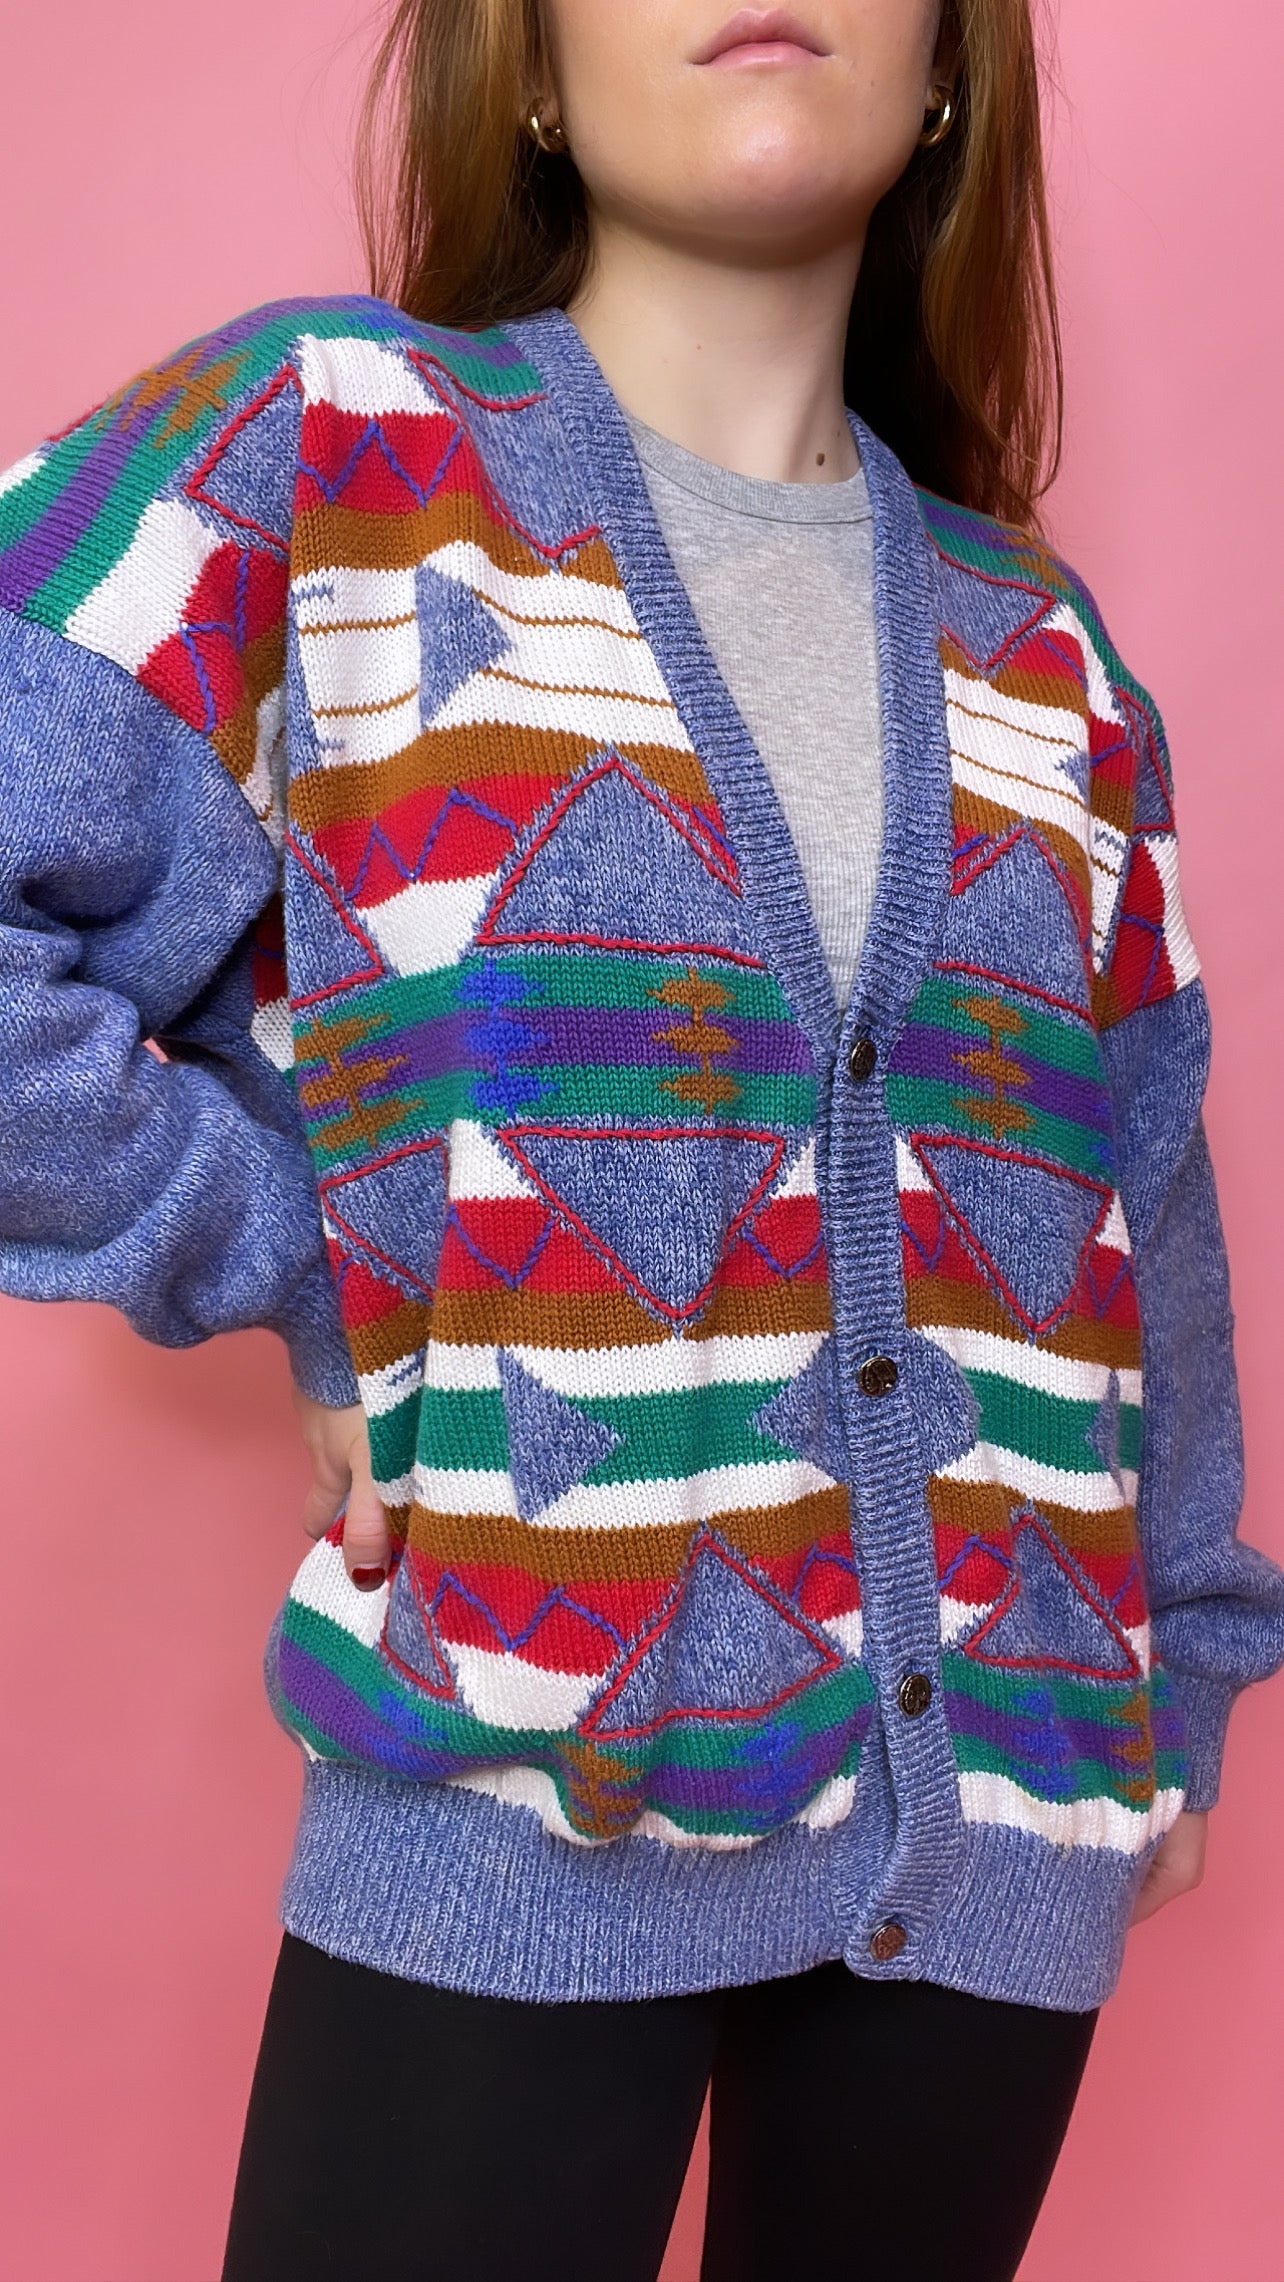 The Bobbie Sweater, 1980's, 54" Bust